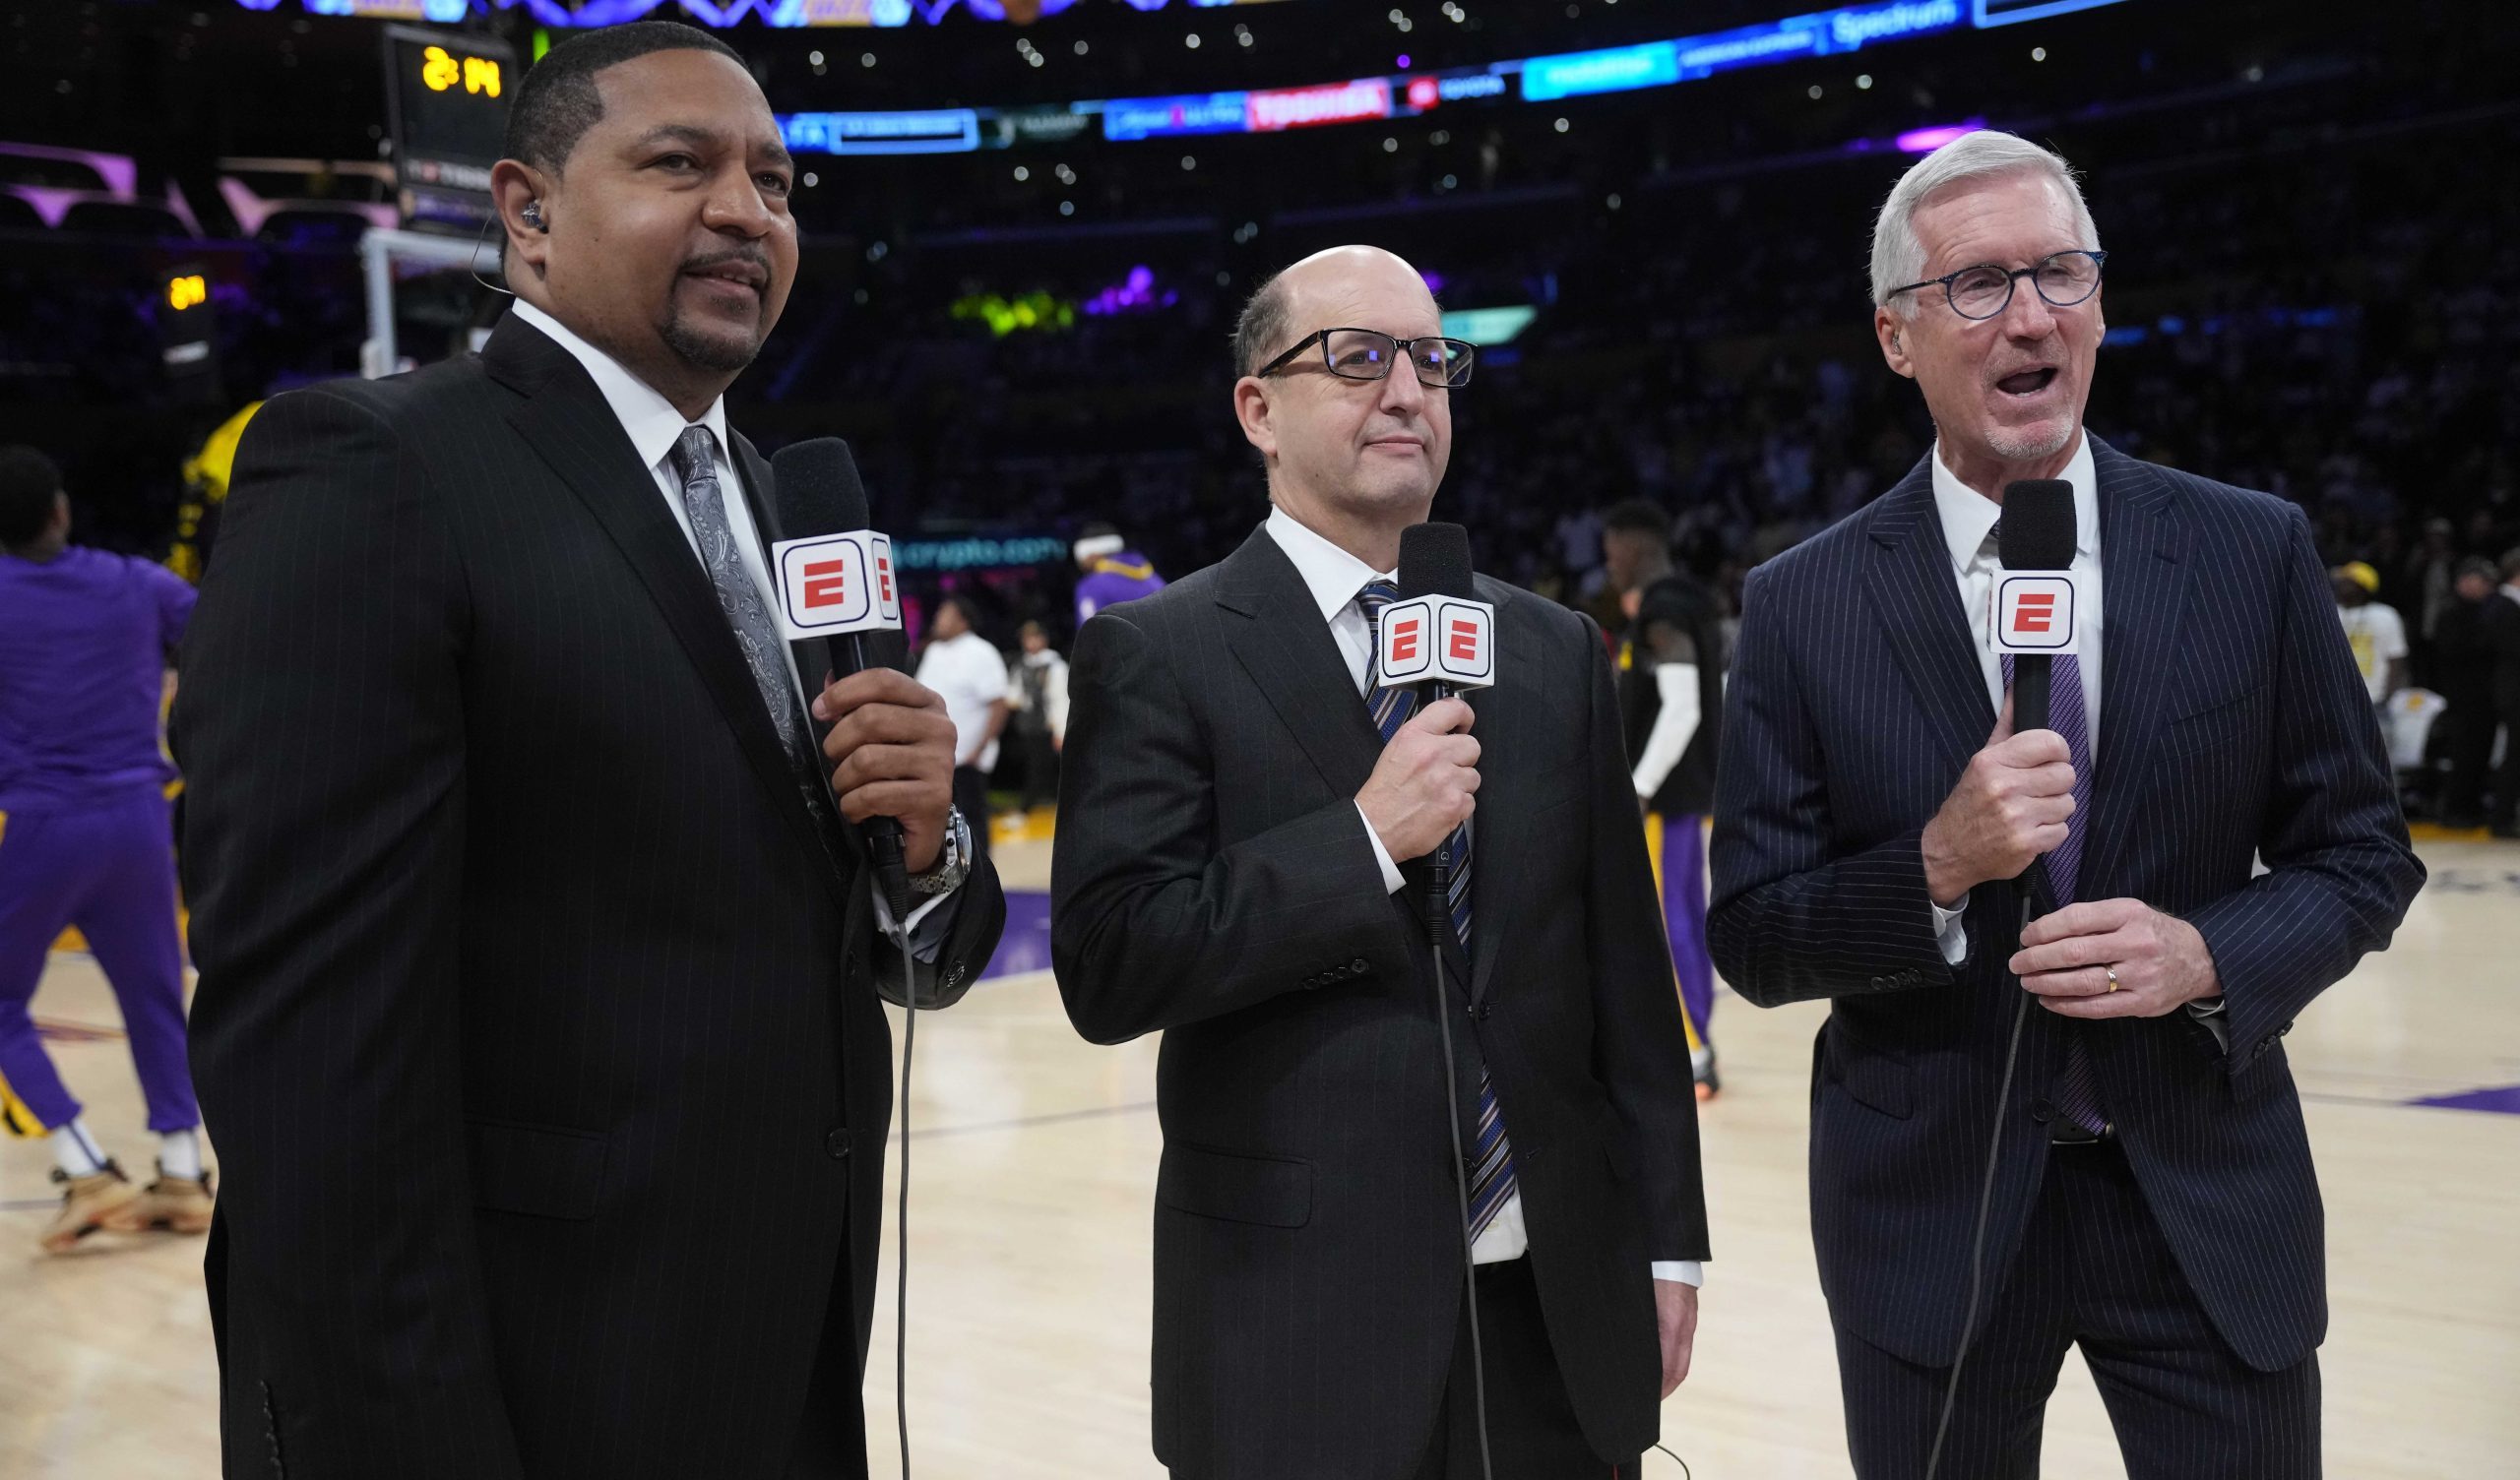 ESPN analyst Mark Jackson (left), commentator Jeff Van Gundy (center) and play-by-play announcer Mike Breen